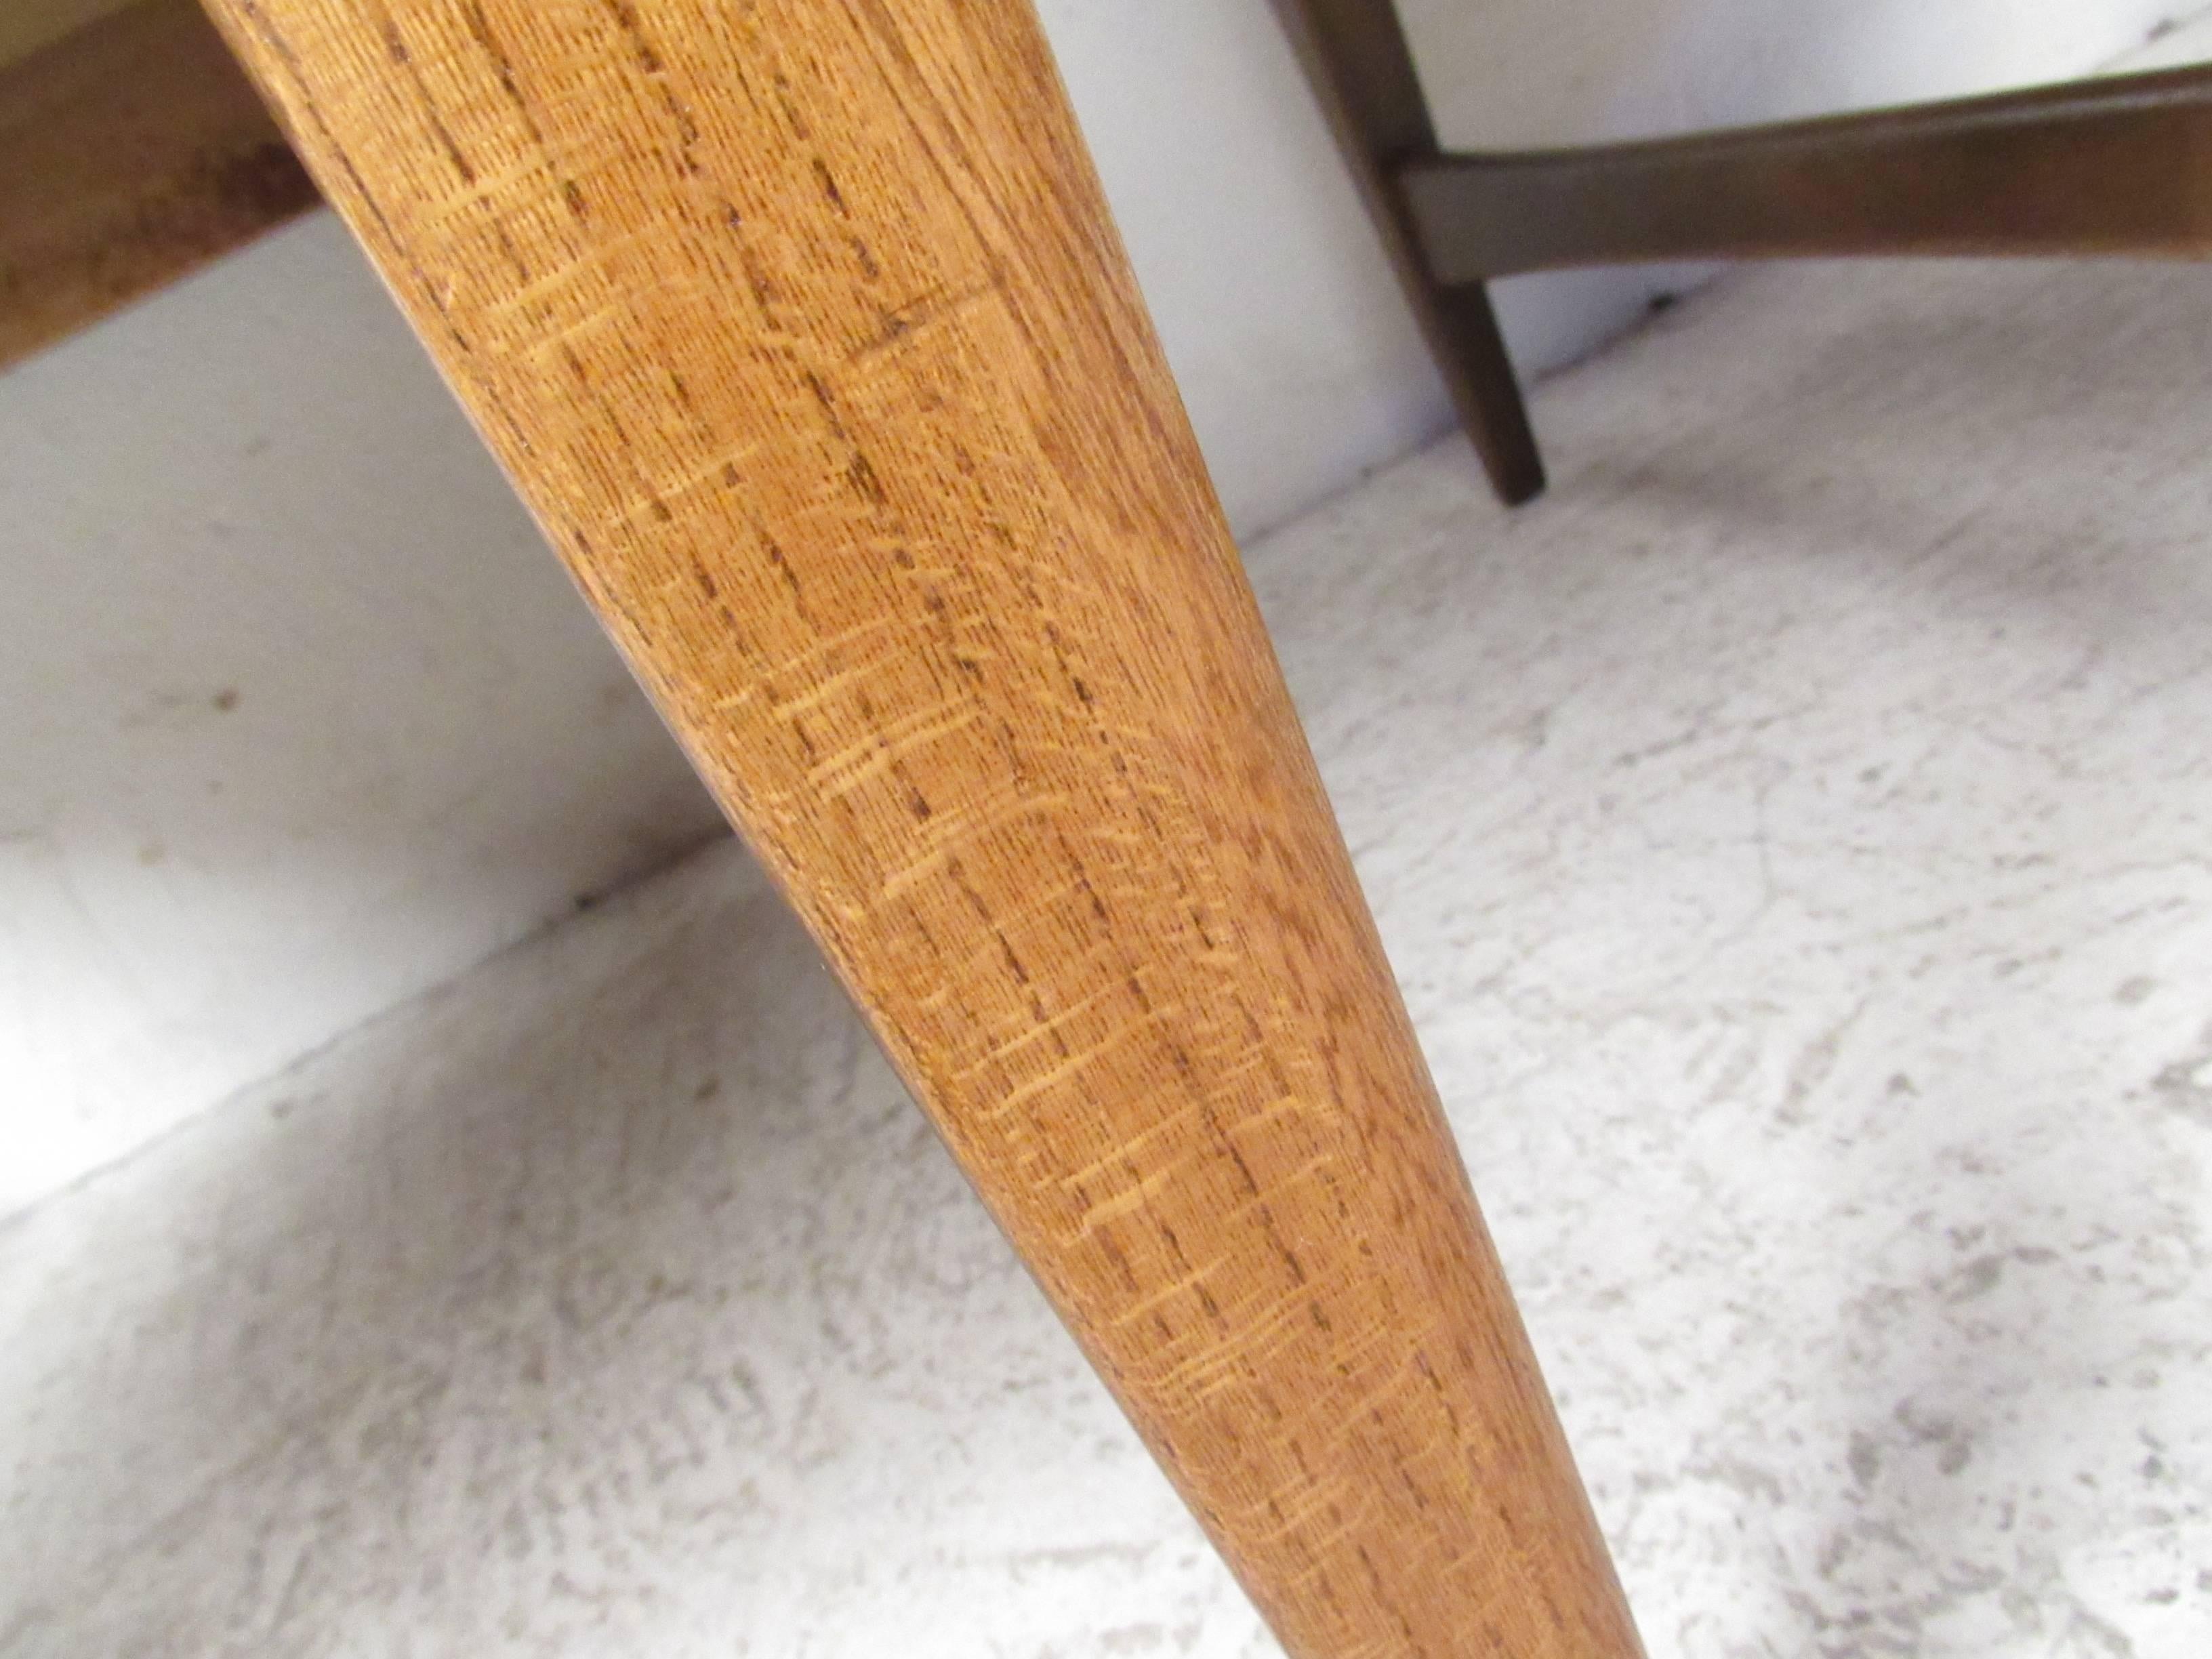 Pair of Mid-Century Modern Cane Front End Tables by Lane For Sale 1